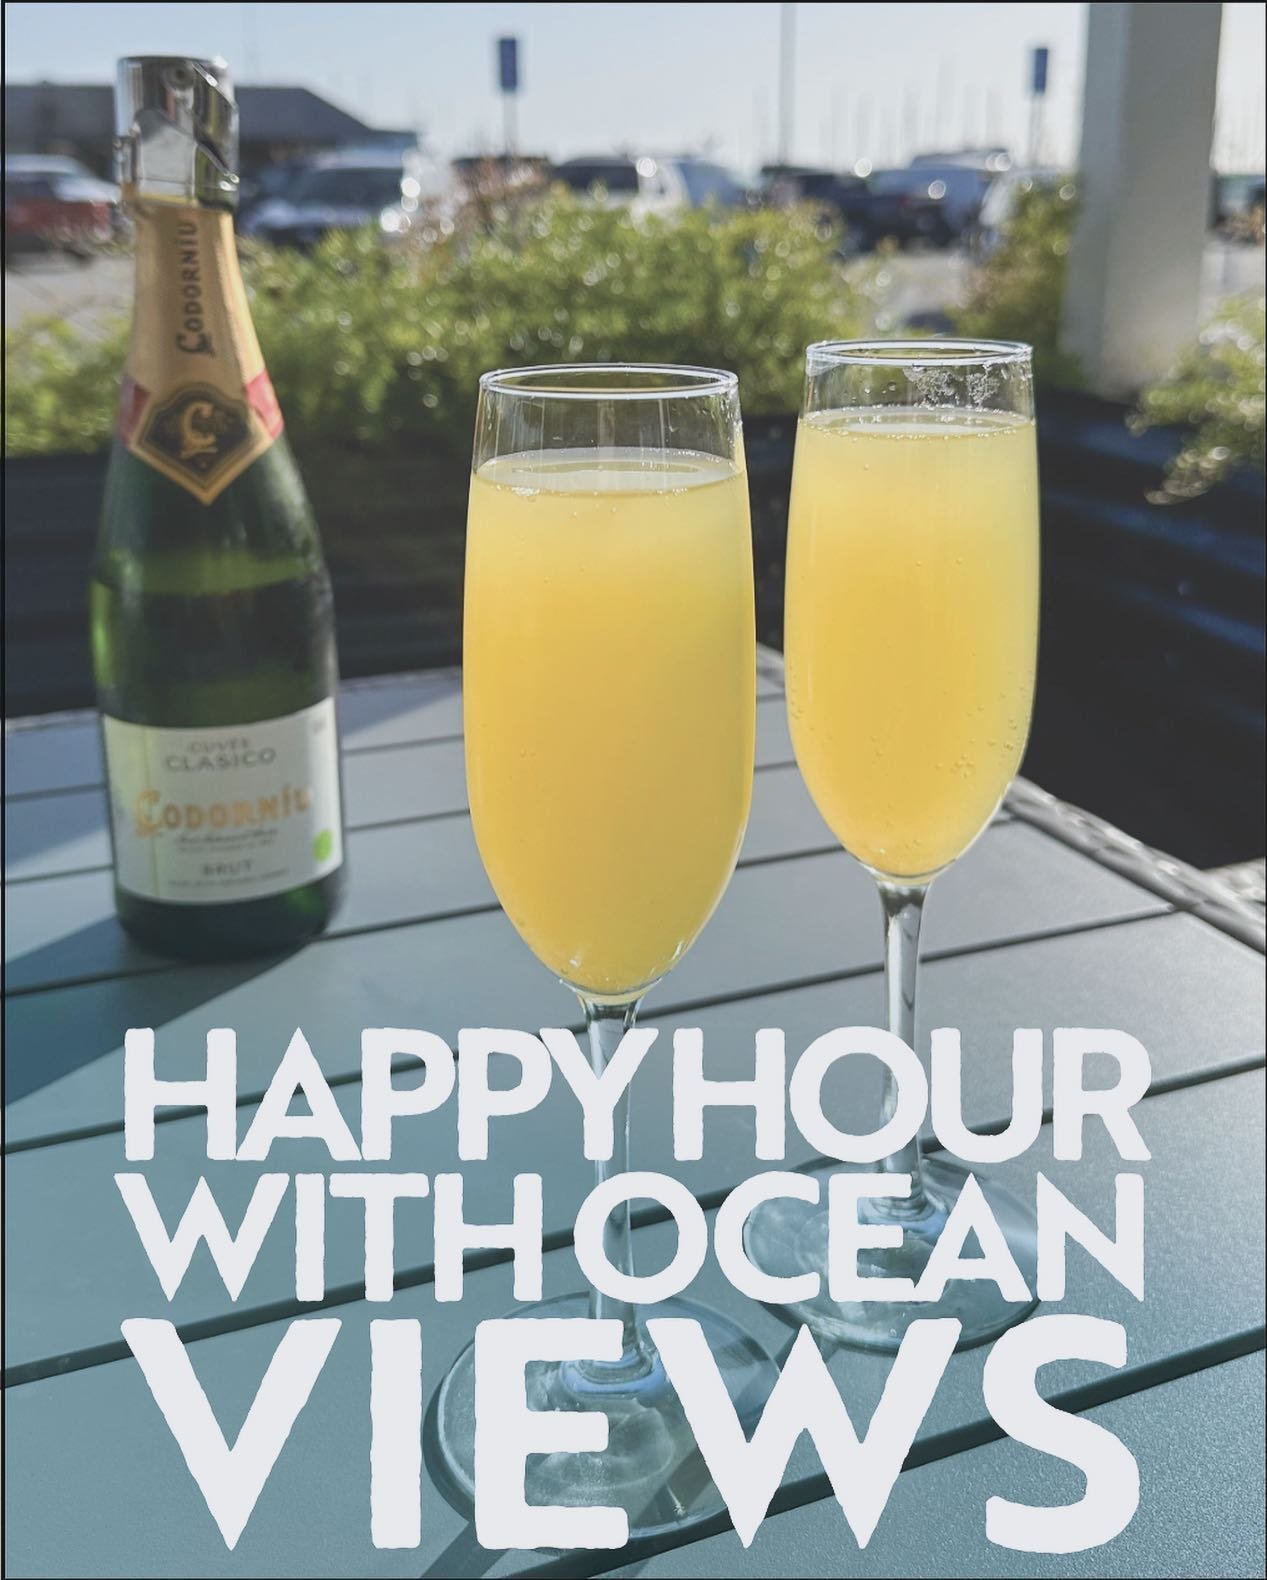 Ketch Harbor Bar&rsquo;s legendary Happy Hour returns to the Coastside every weeknight from 3:00 to 6:00. Take a seat and relish Chef Eduardo&rsquo; culinary creations and Roberto&rsquo;s mixology; only outdone by our panoramic Mavericks views.